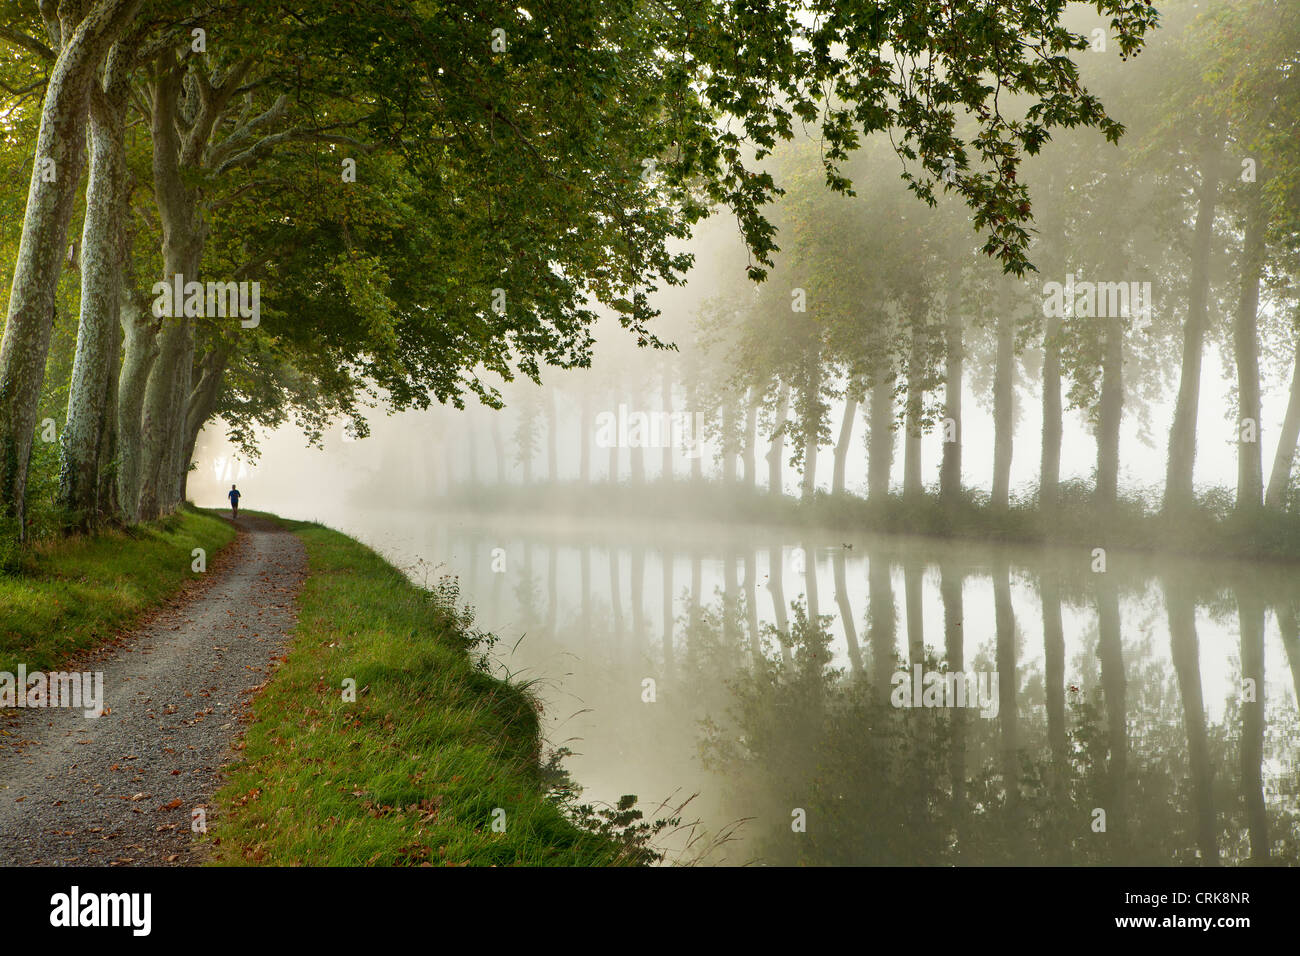 a jogger on the towpath of the Canal du Midi nr Castelnaudary, Languedoc-Rousillon, France Stock Photo